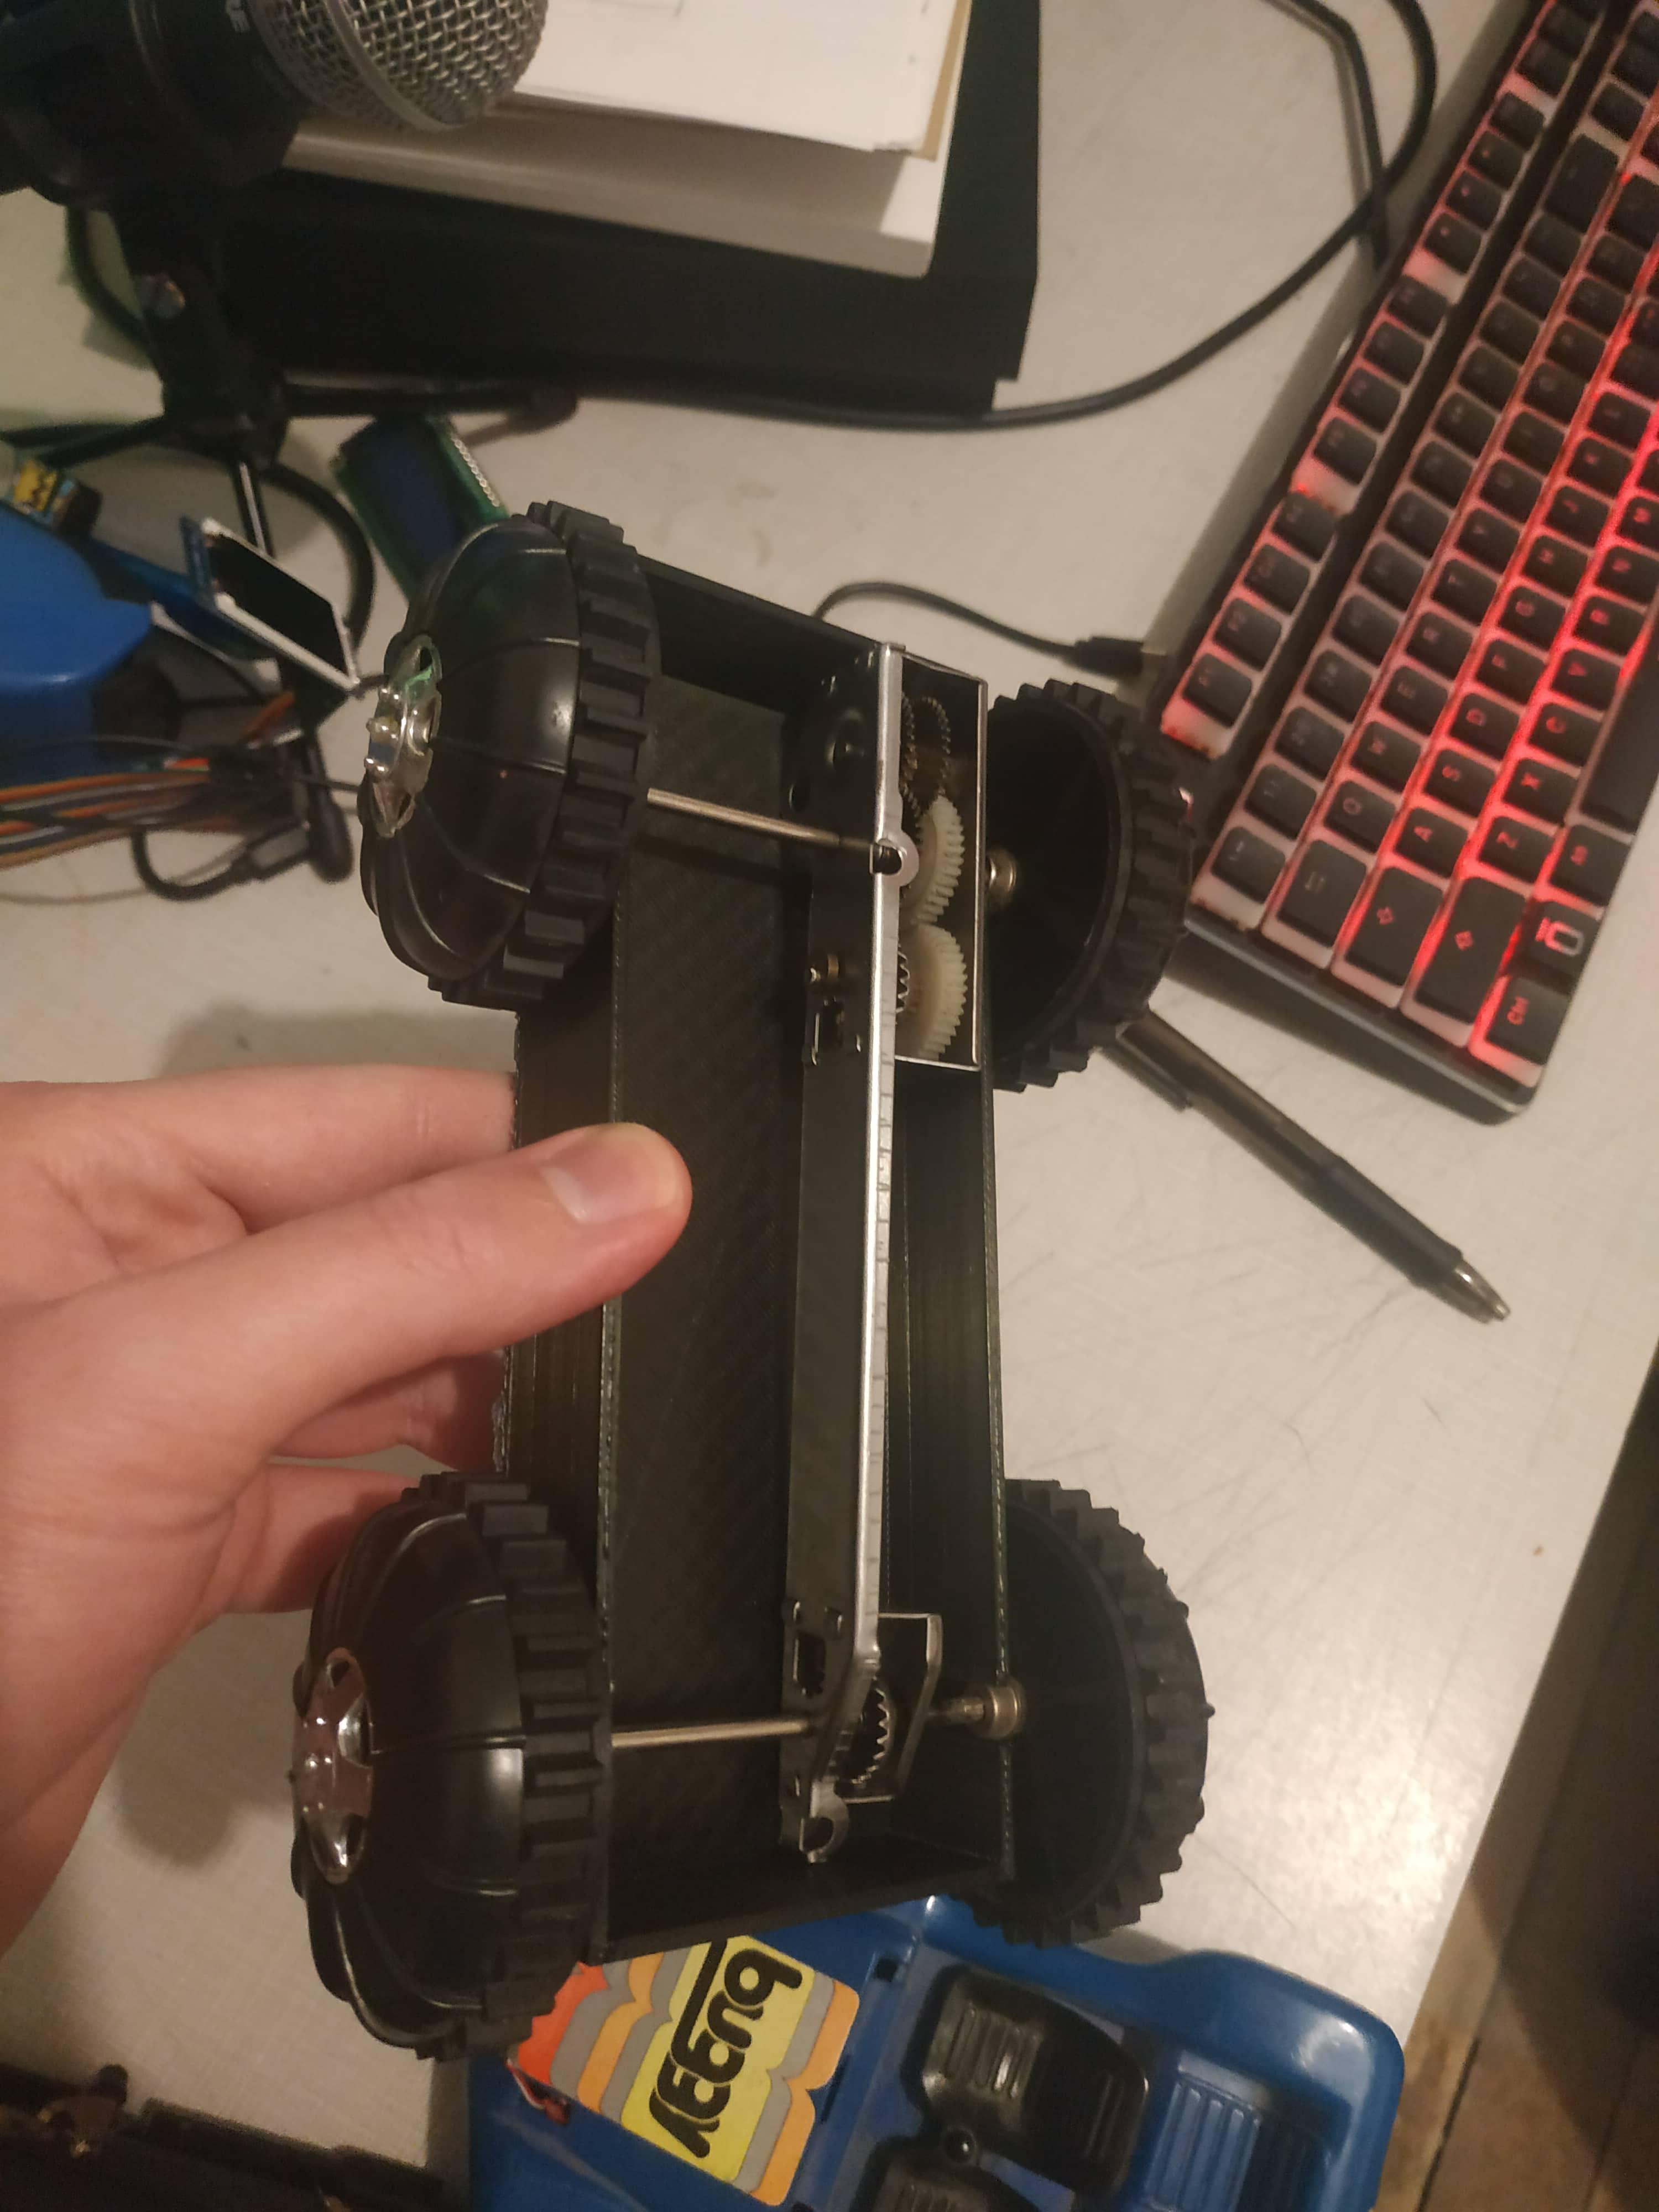 The drivetrain (gearbox, wheels, and axles) of the buggy fit pretty well into the box I printed